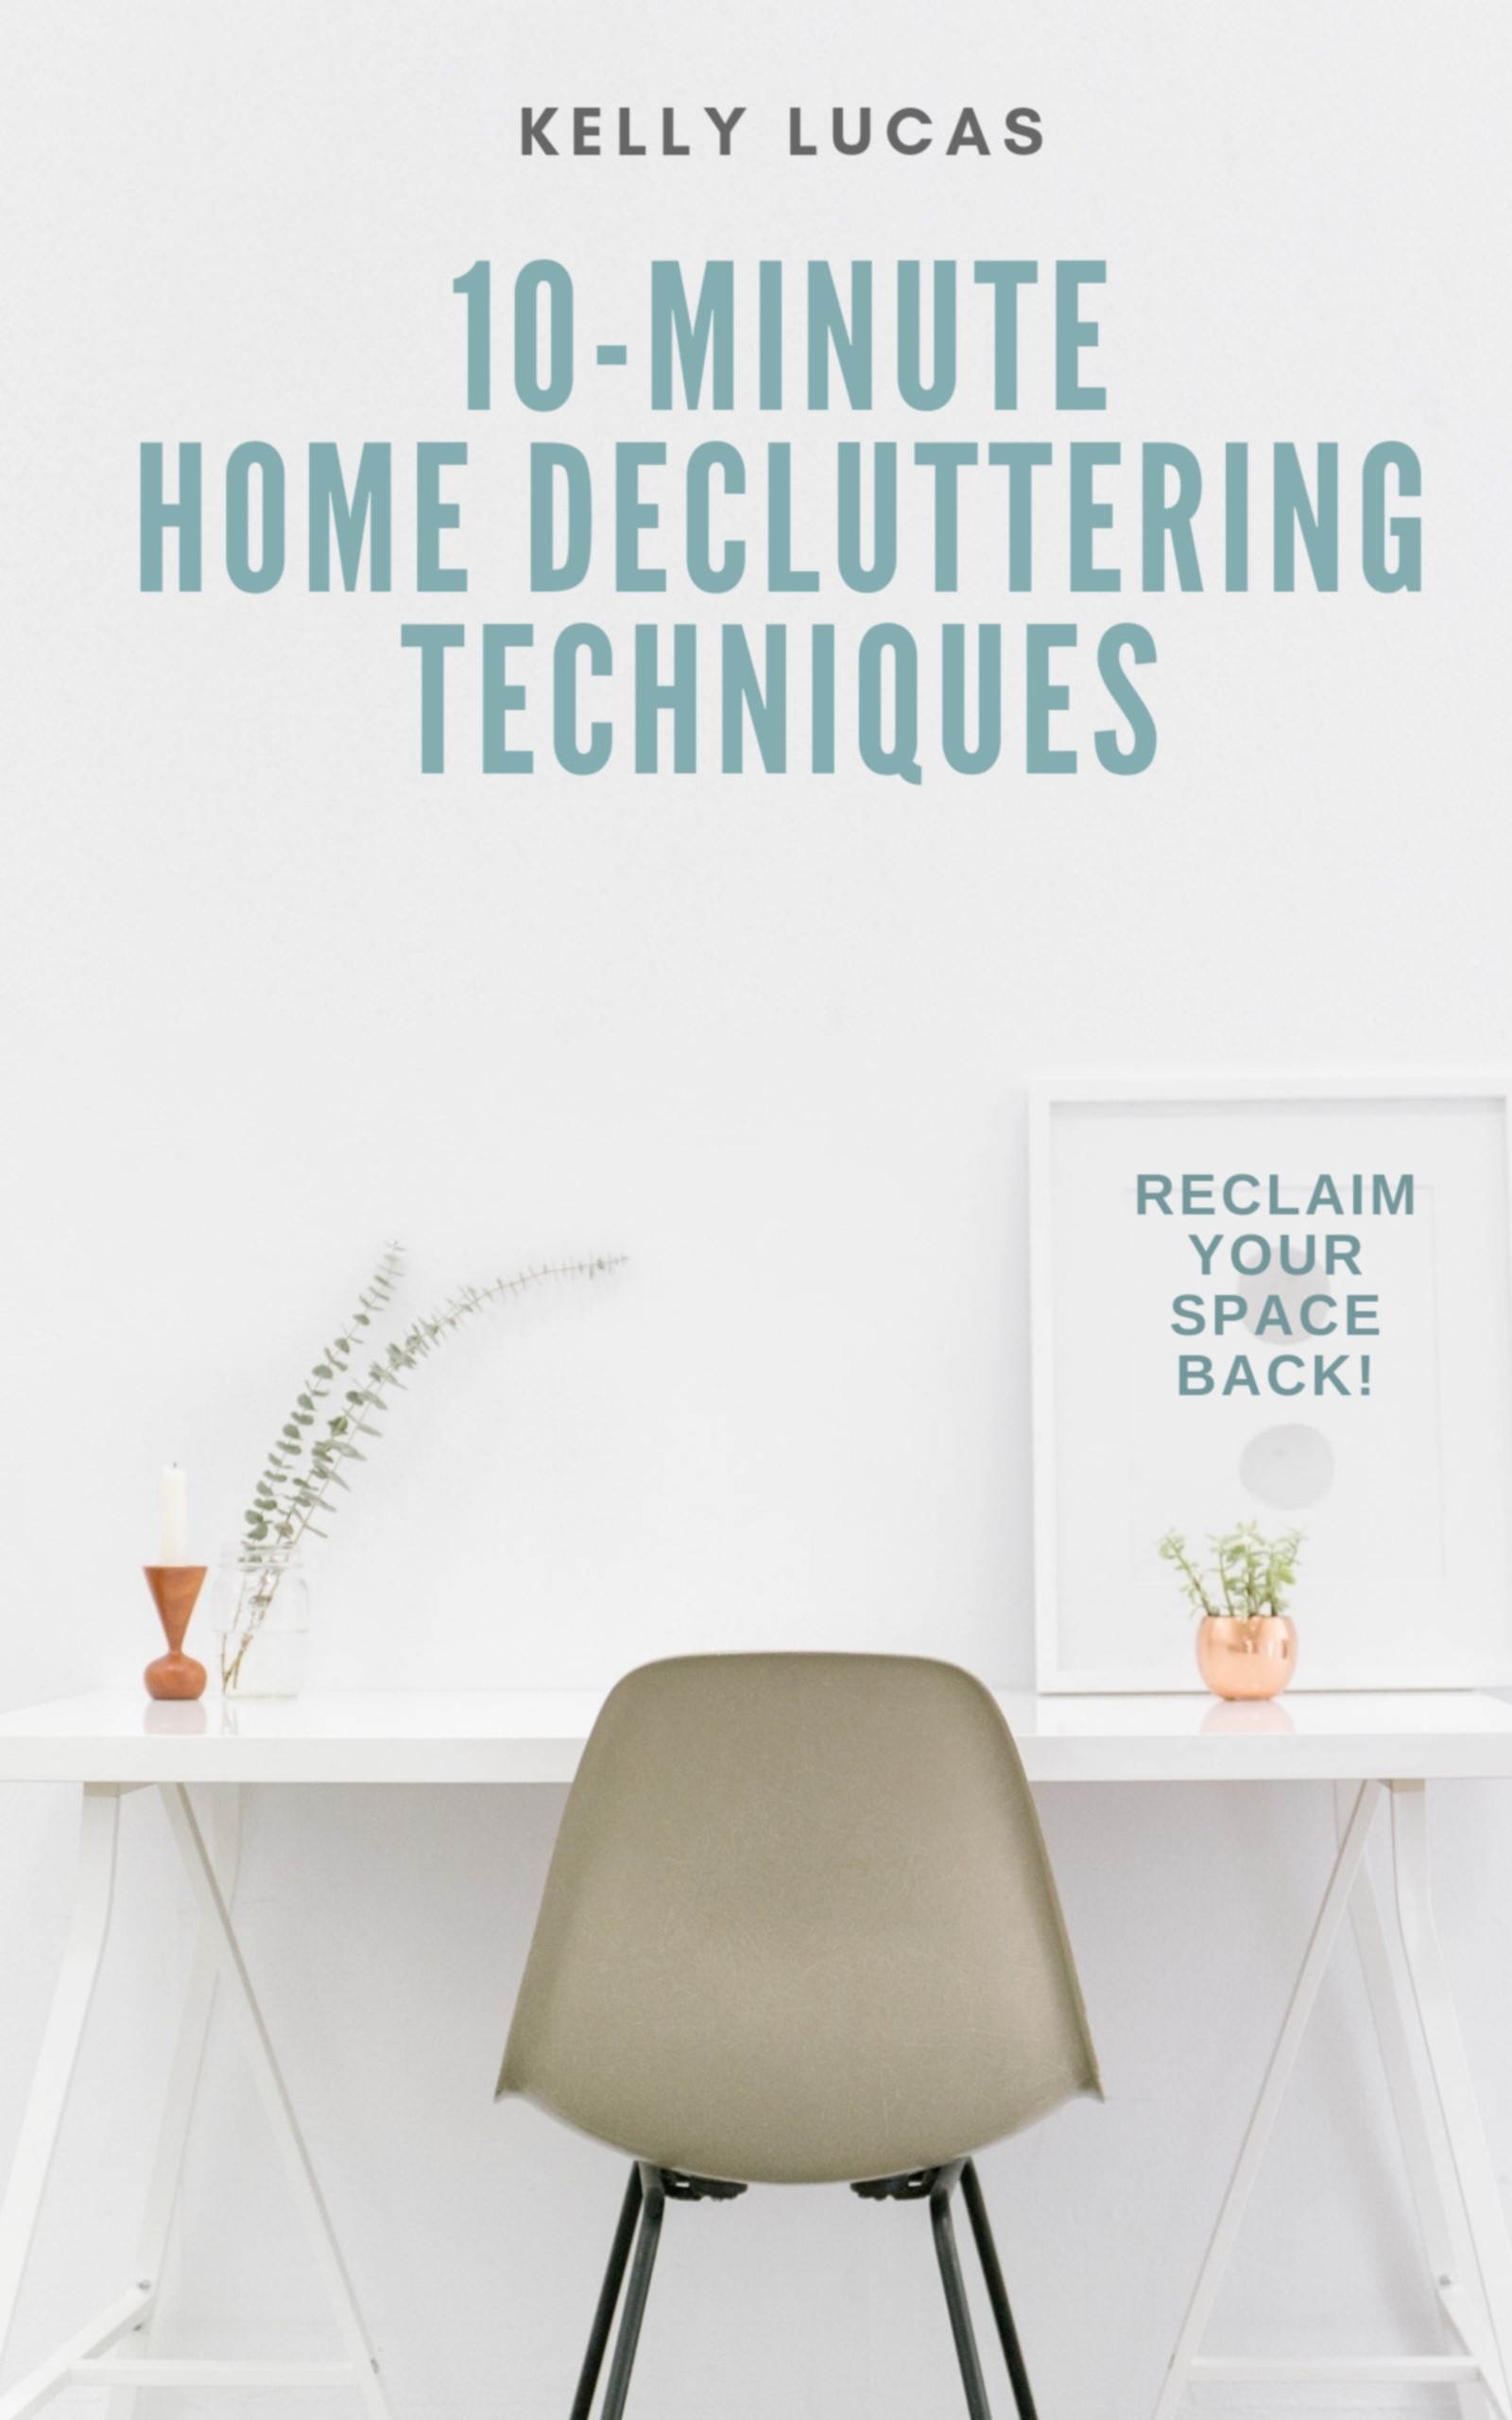 FREE: 10-MINUTE Home Decluttering Techniques: Reclaim Your Space Back! by Kelly Lucas